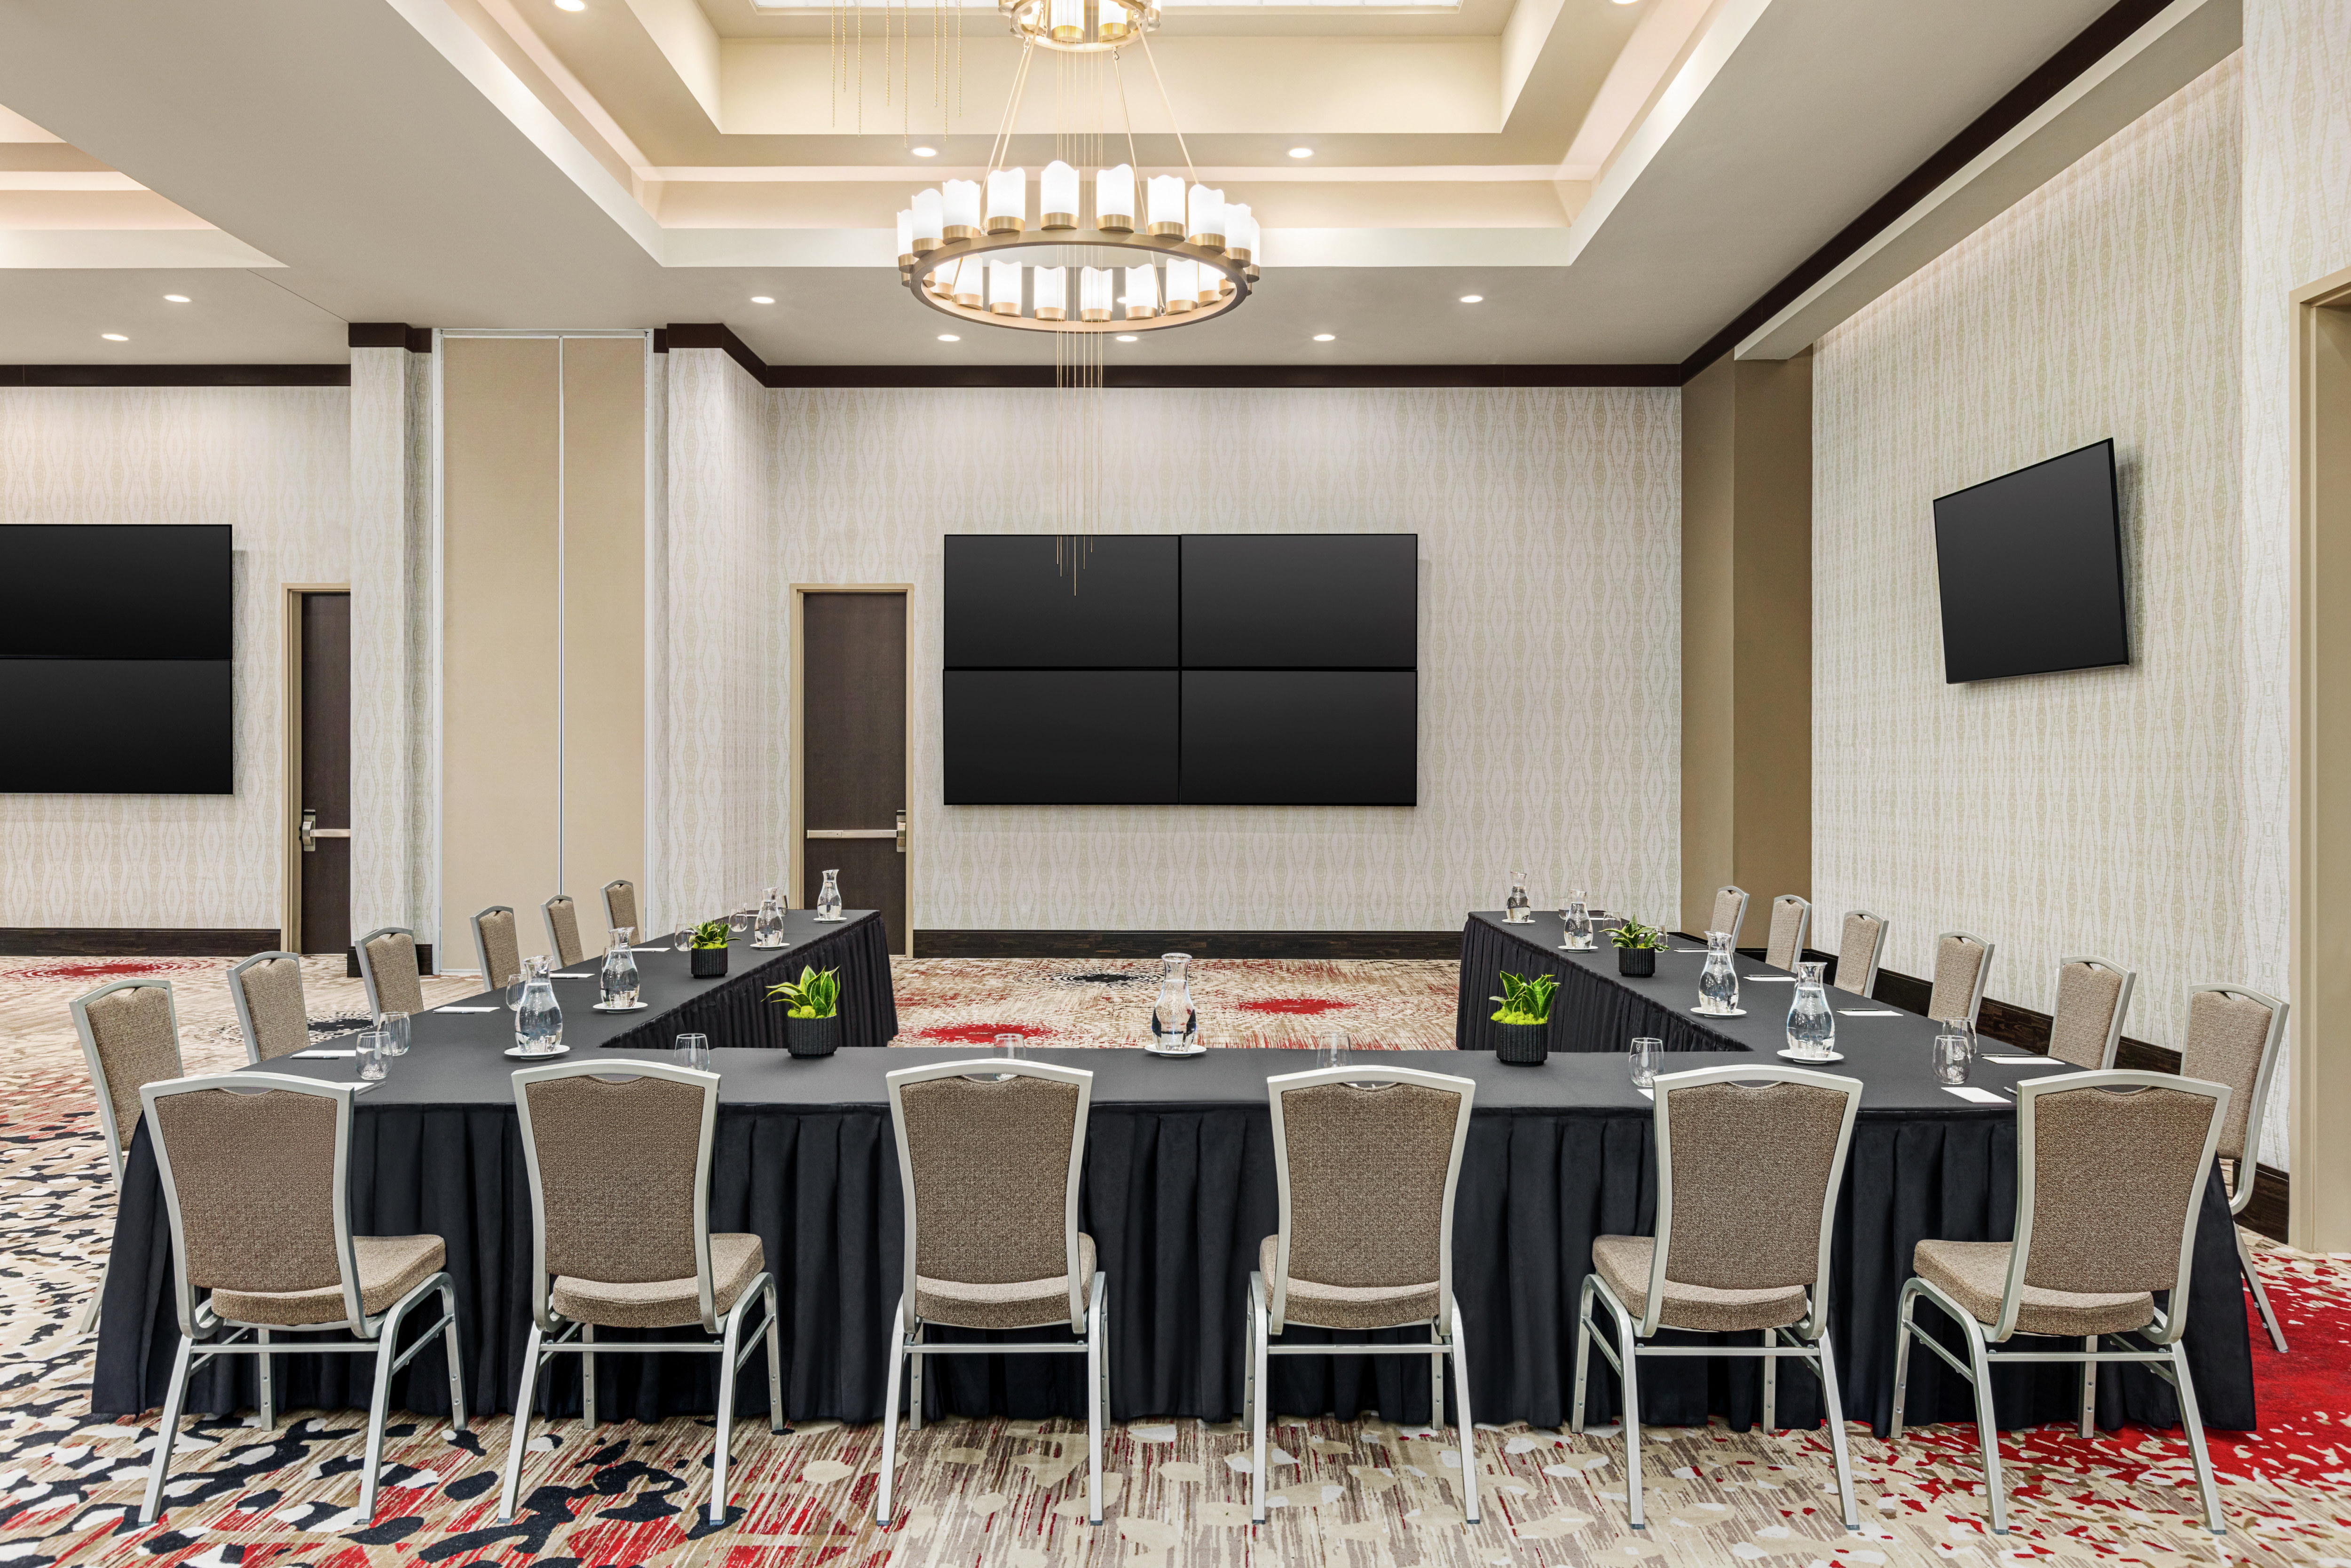 Spacious meeting room featuring u shape style setup, stylish design, and TV screens at front of room.